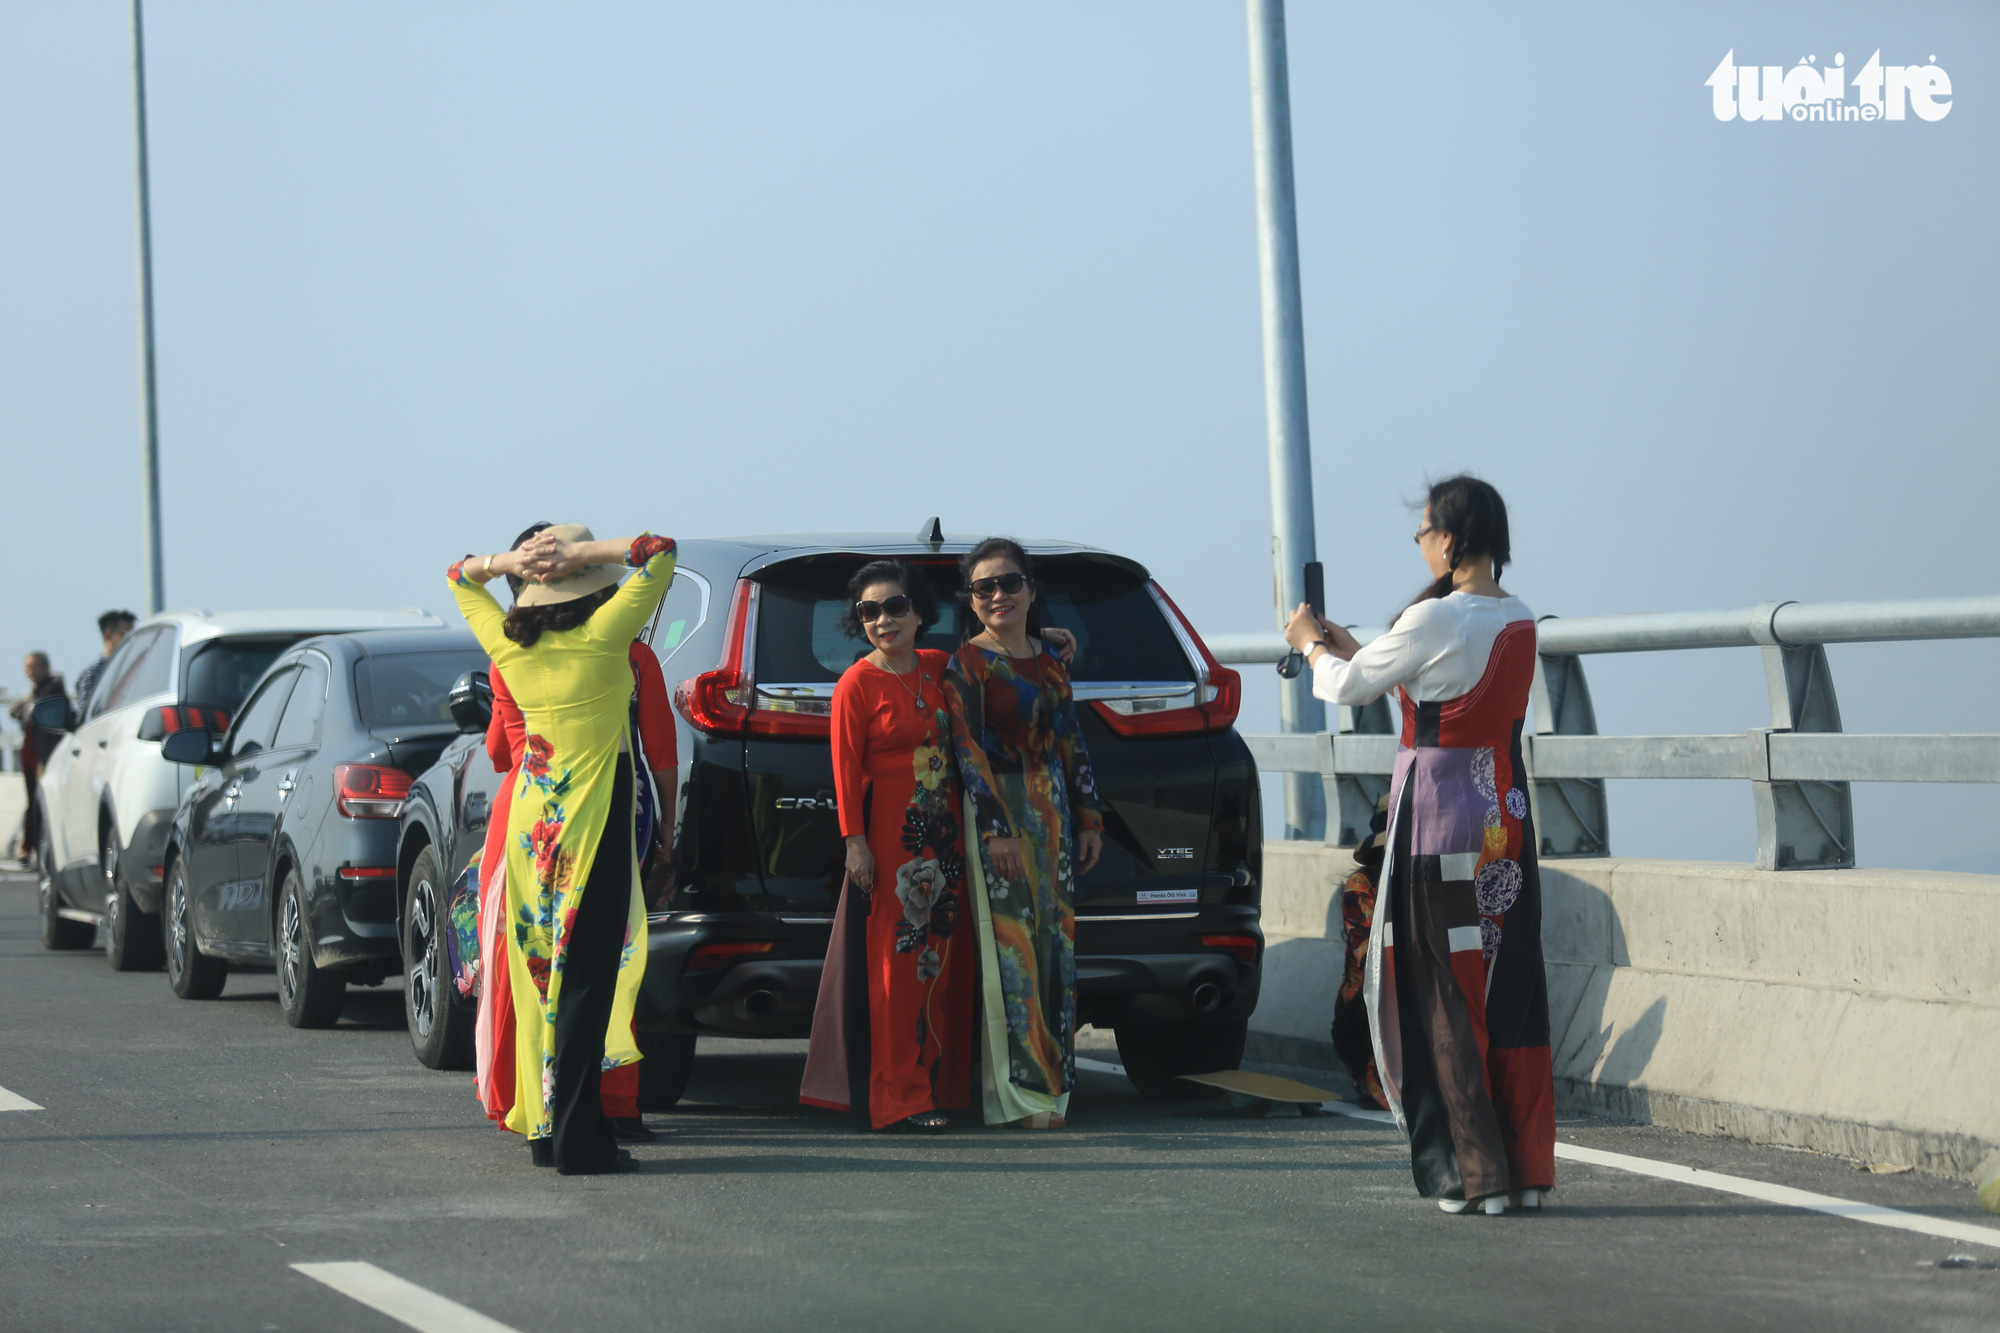 A group of women illegally stop their car to take photos on the Cua Hoi Bridge in north-central Vietnam, February 15, 2021. Photo: Ngoc Thang / Tuoi Tre